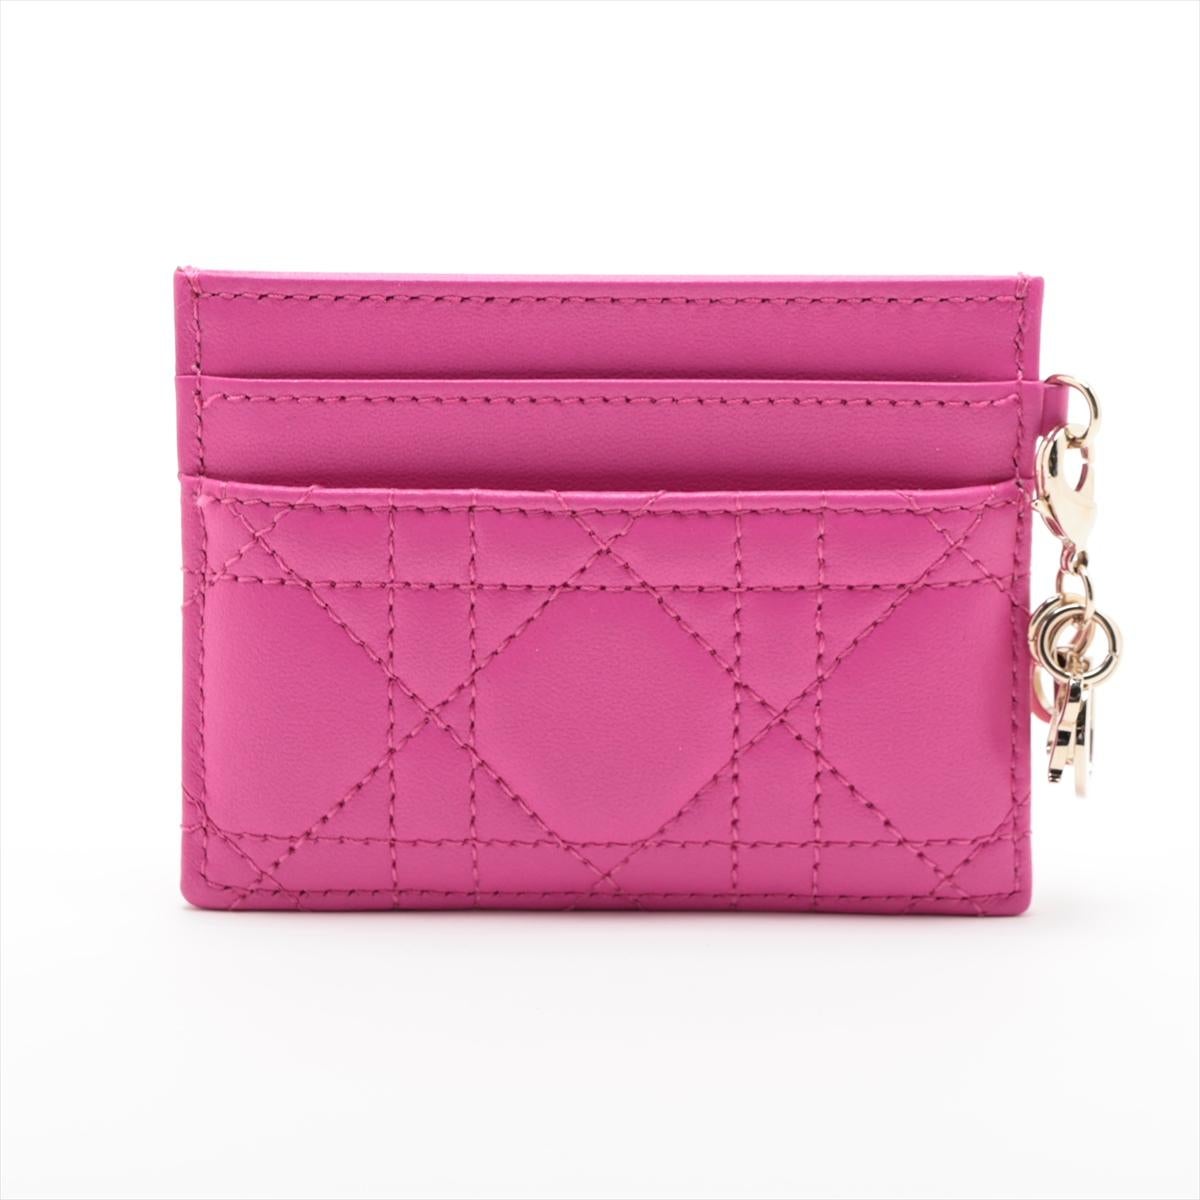 Christian Dior Lady Dior Lambskin Cannage Card Case Fuchsia Pink In Good Condition For Sale In Indianapolis, IN